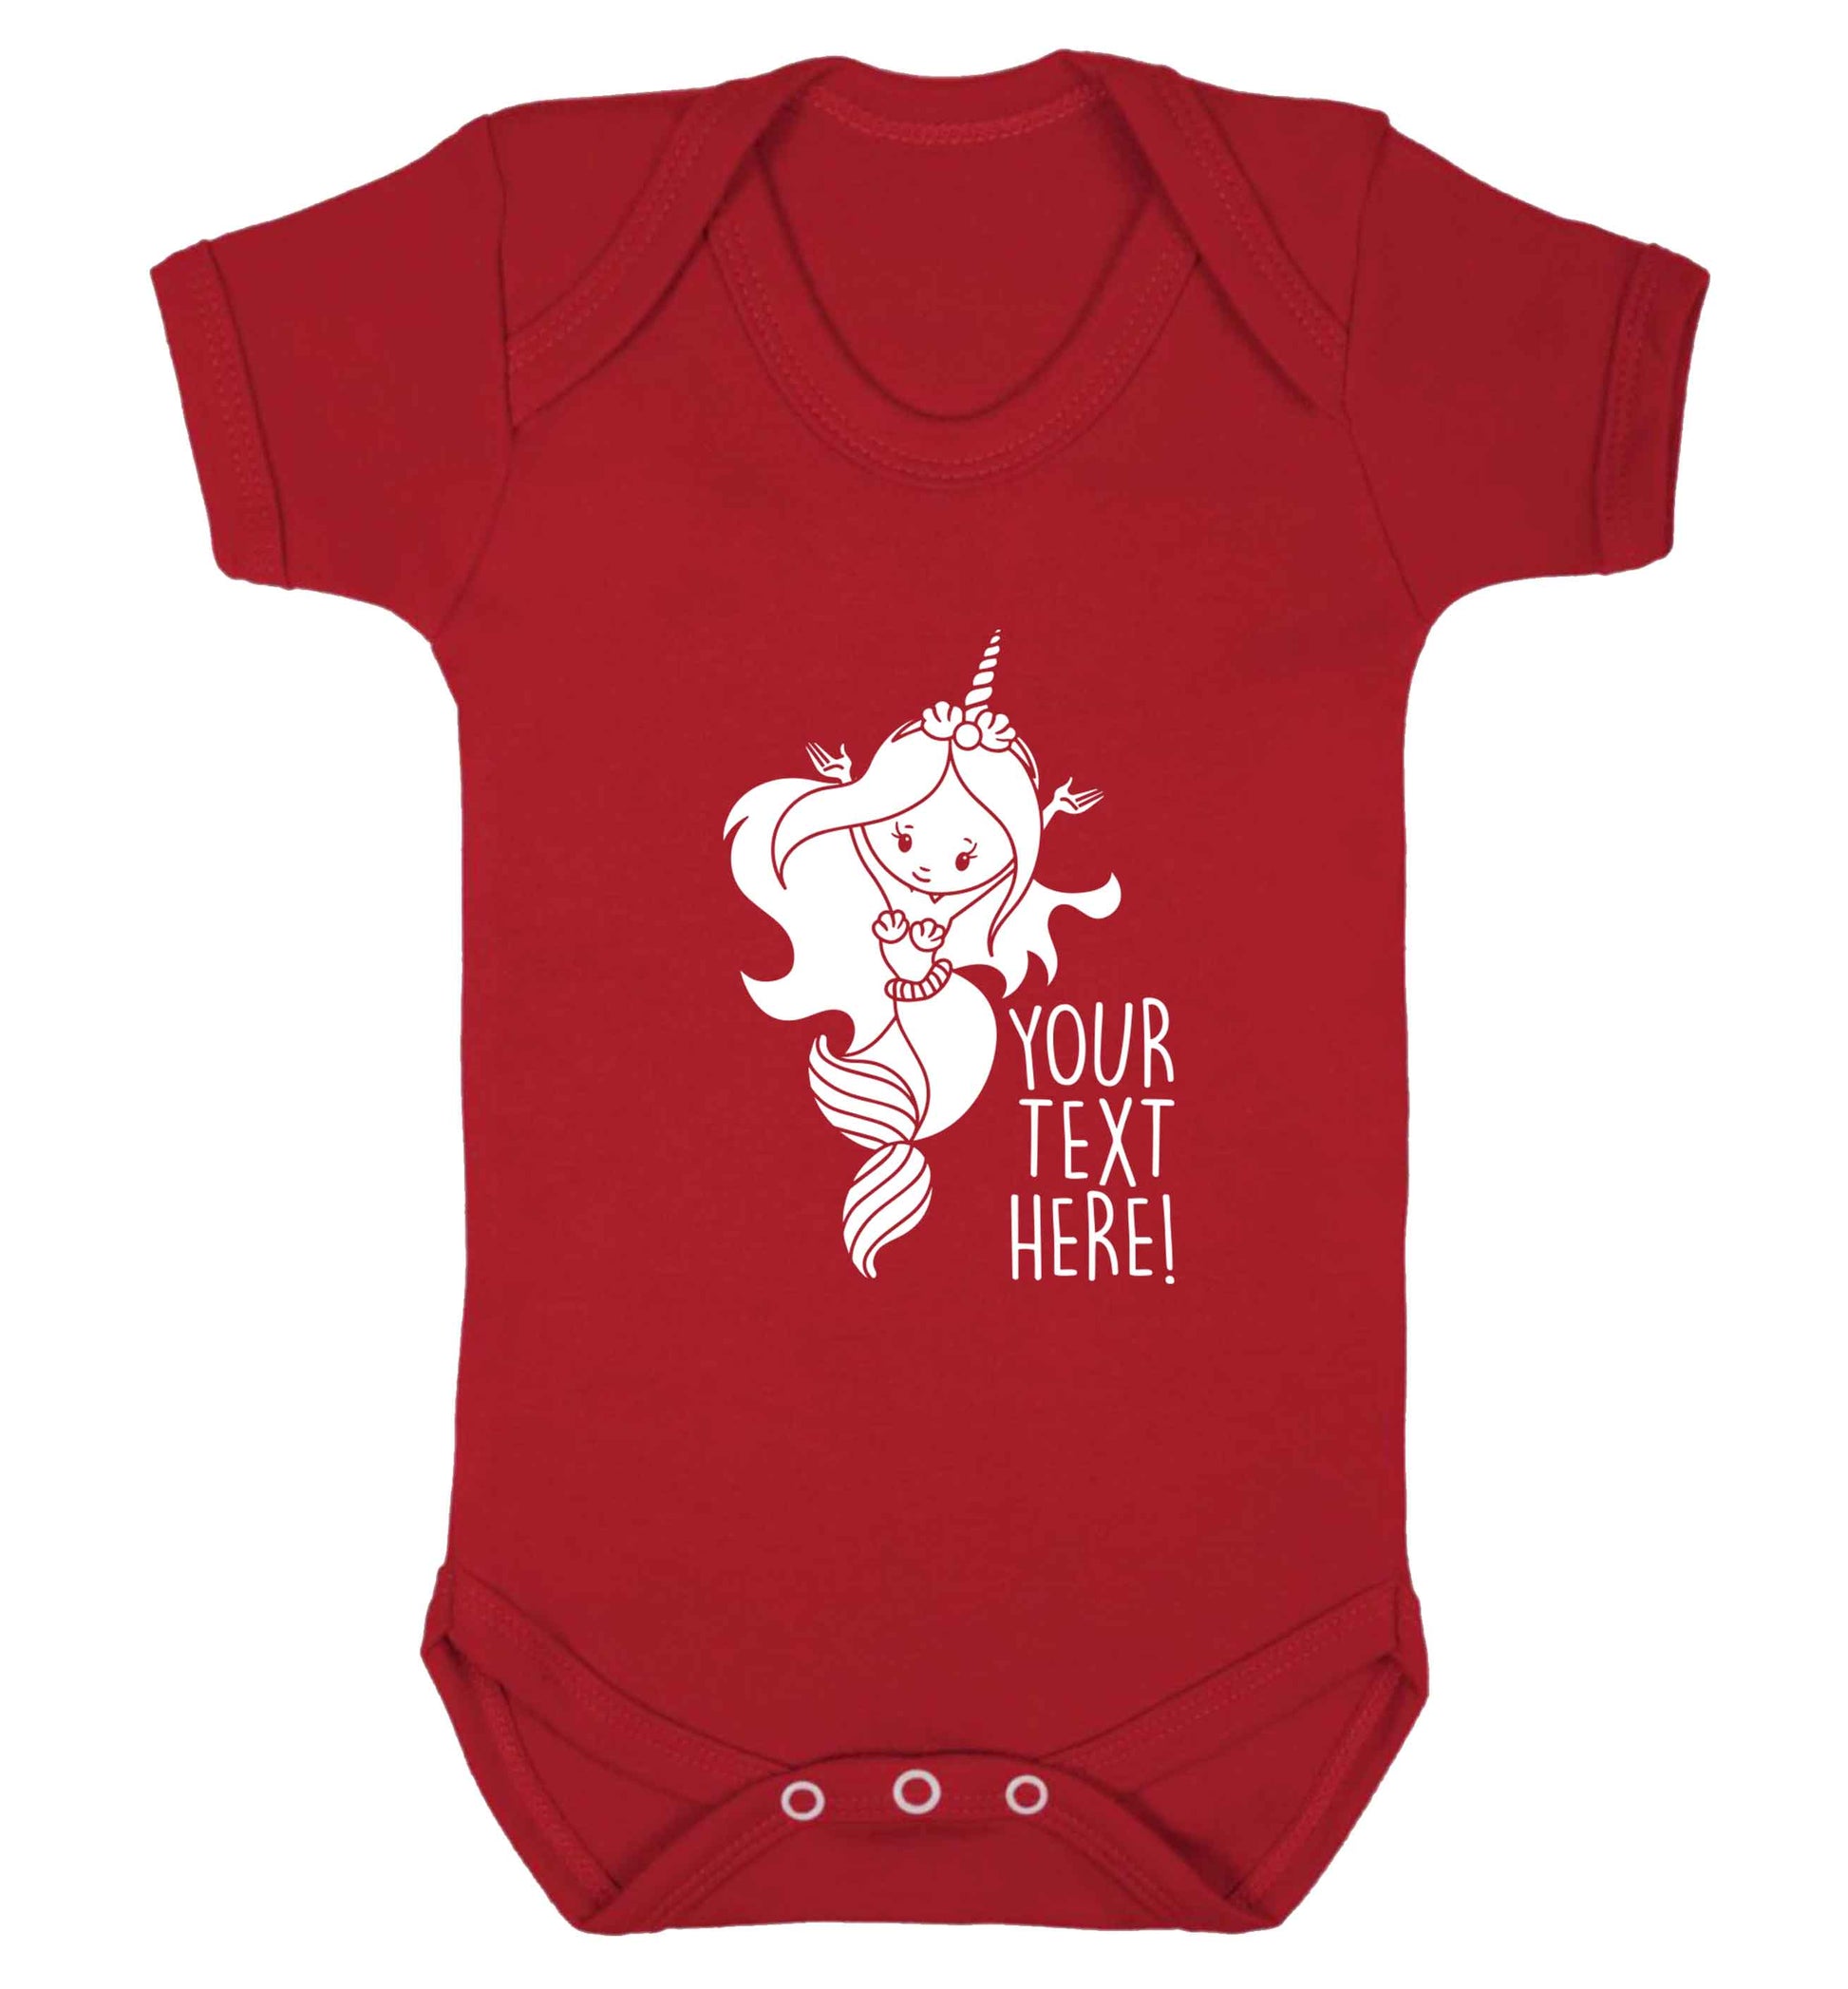 Mermaid with unicorn headband any text baby vest red 18-24 months